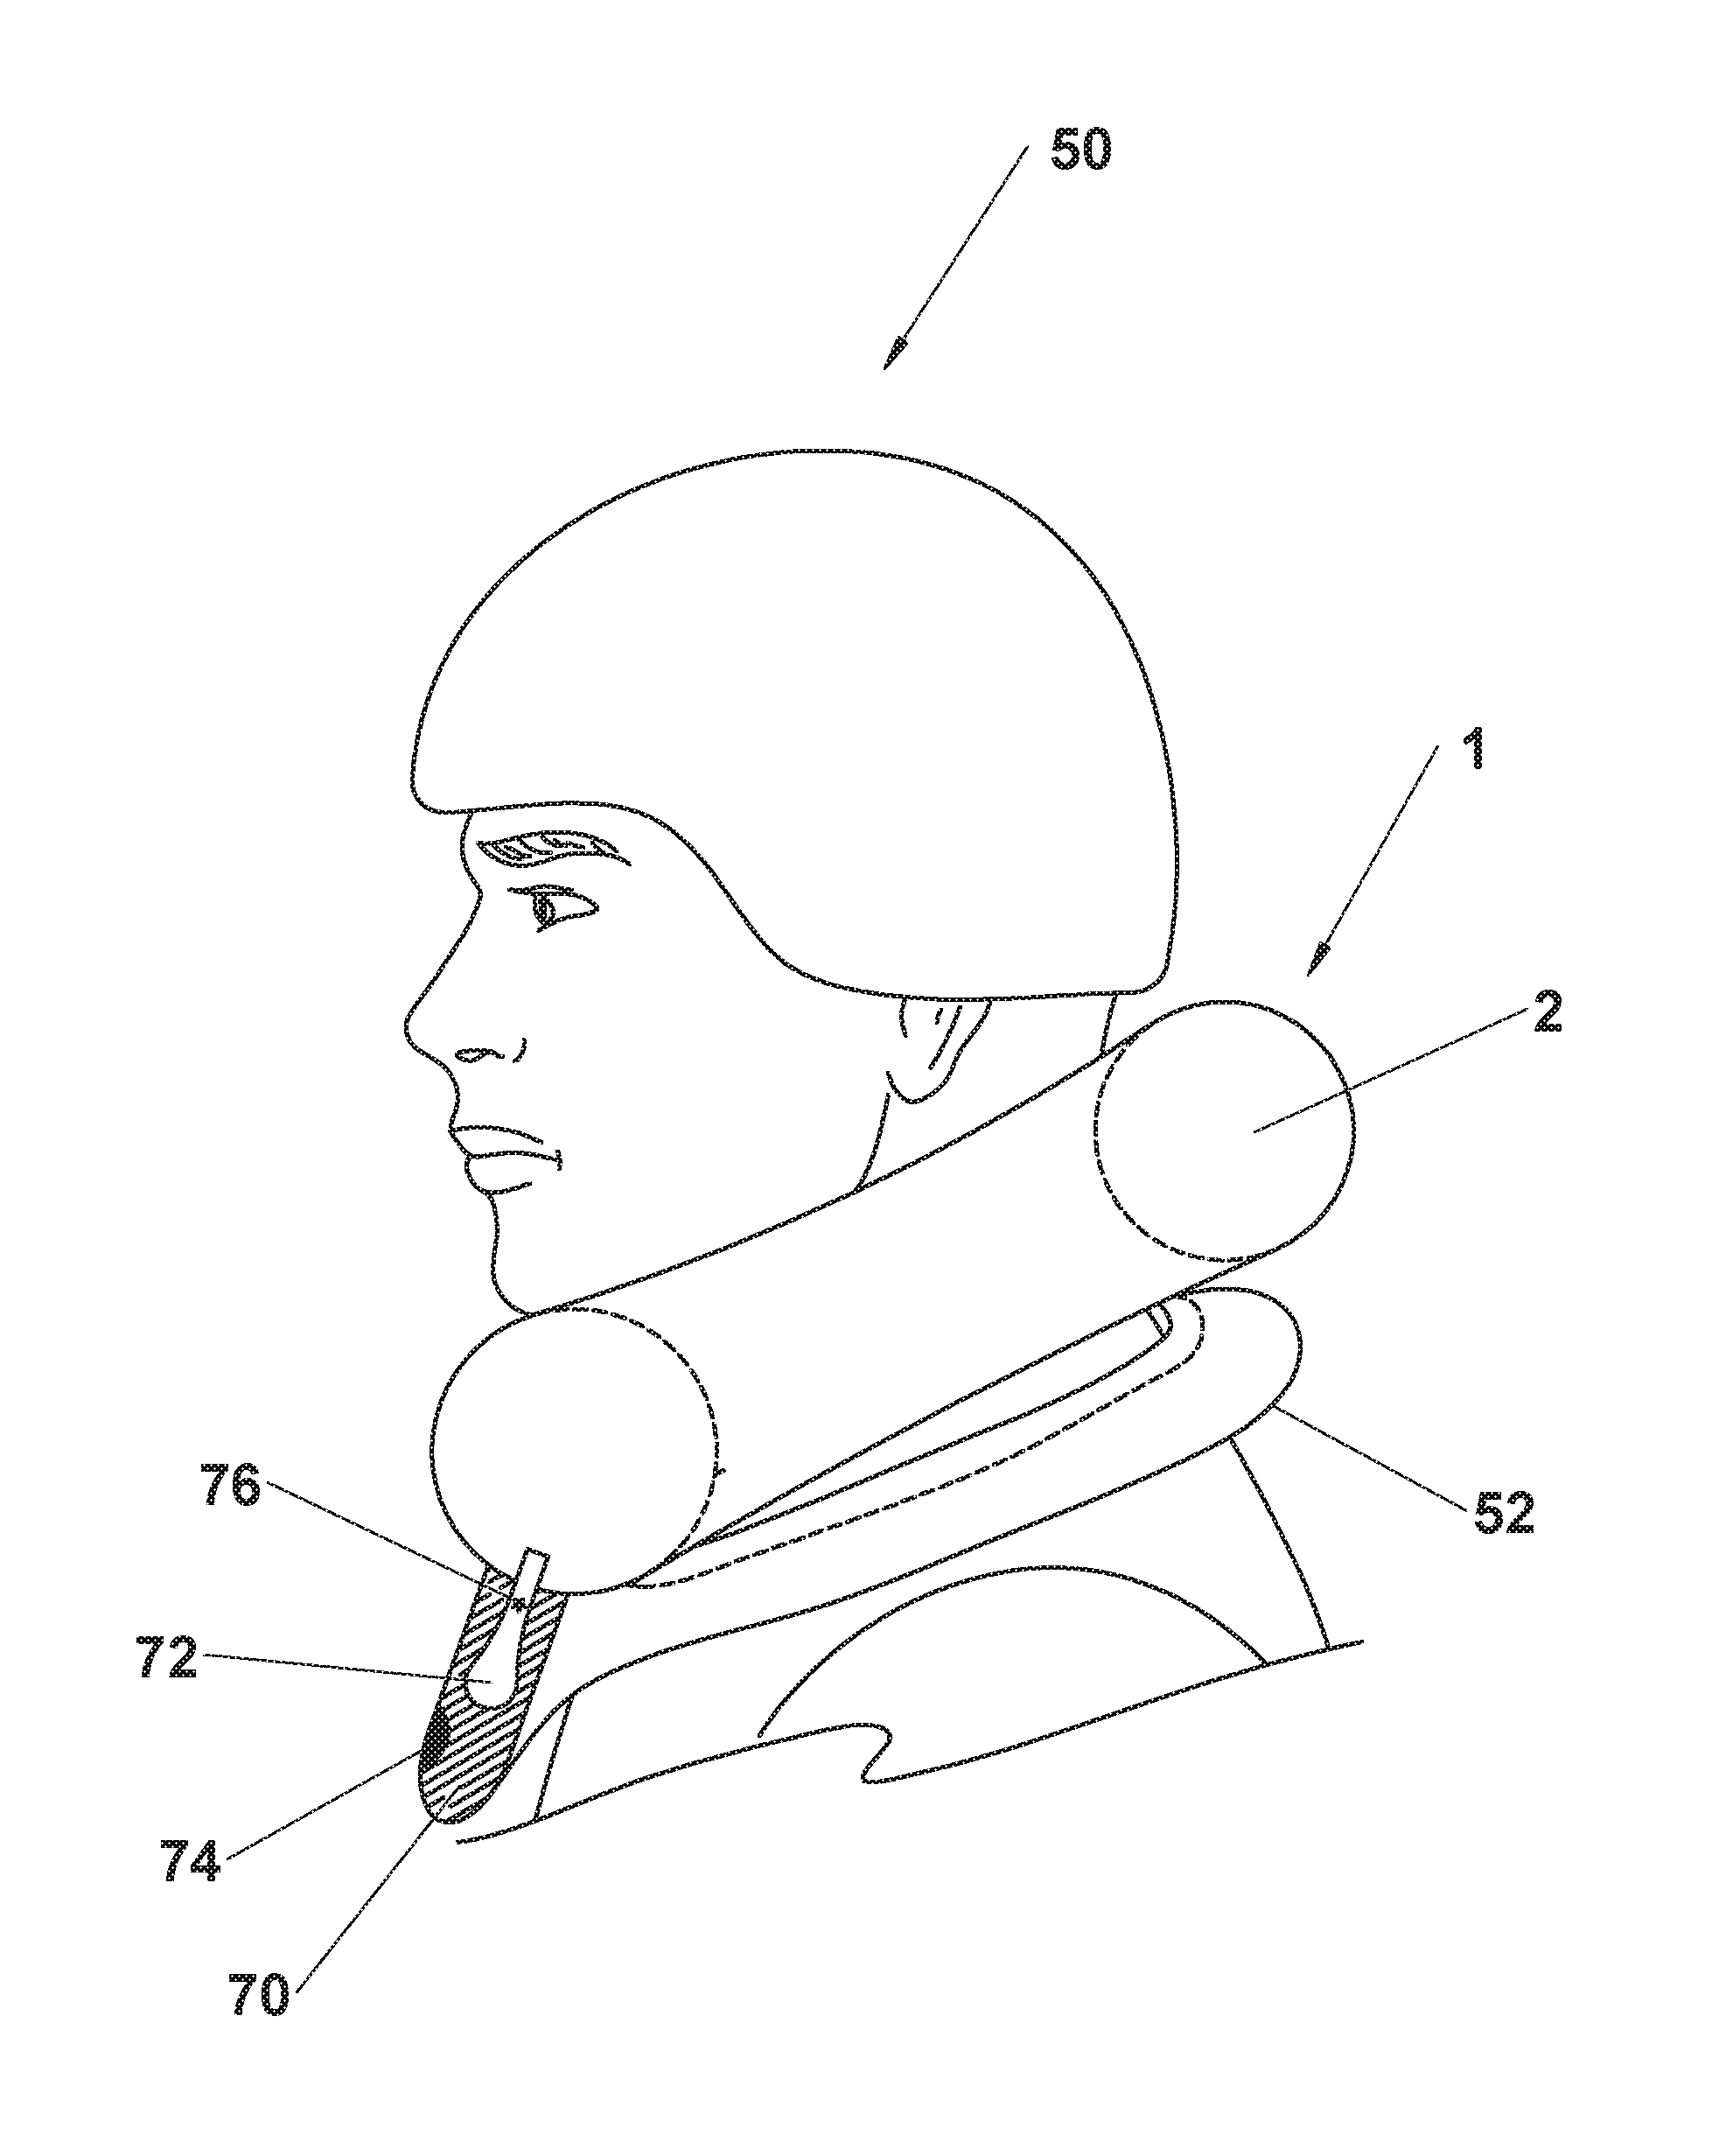 Inflatable blast-induced brain injury prevention device